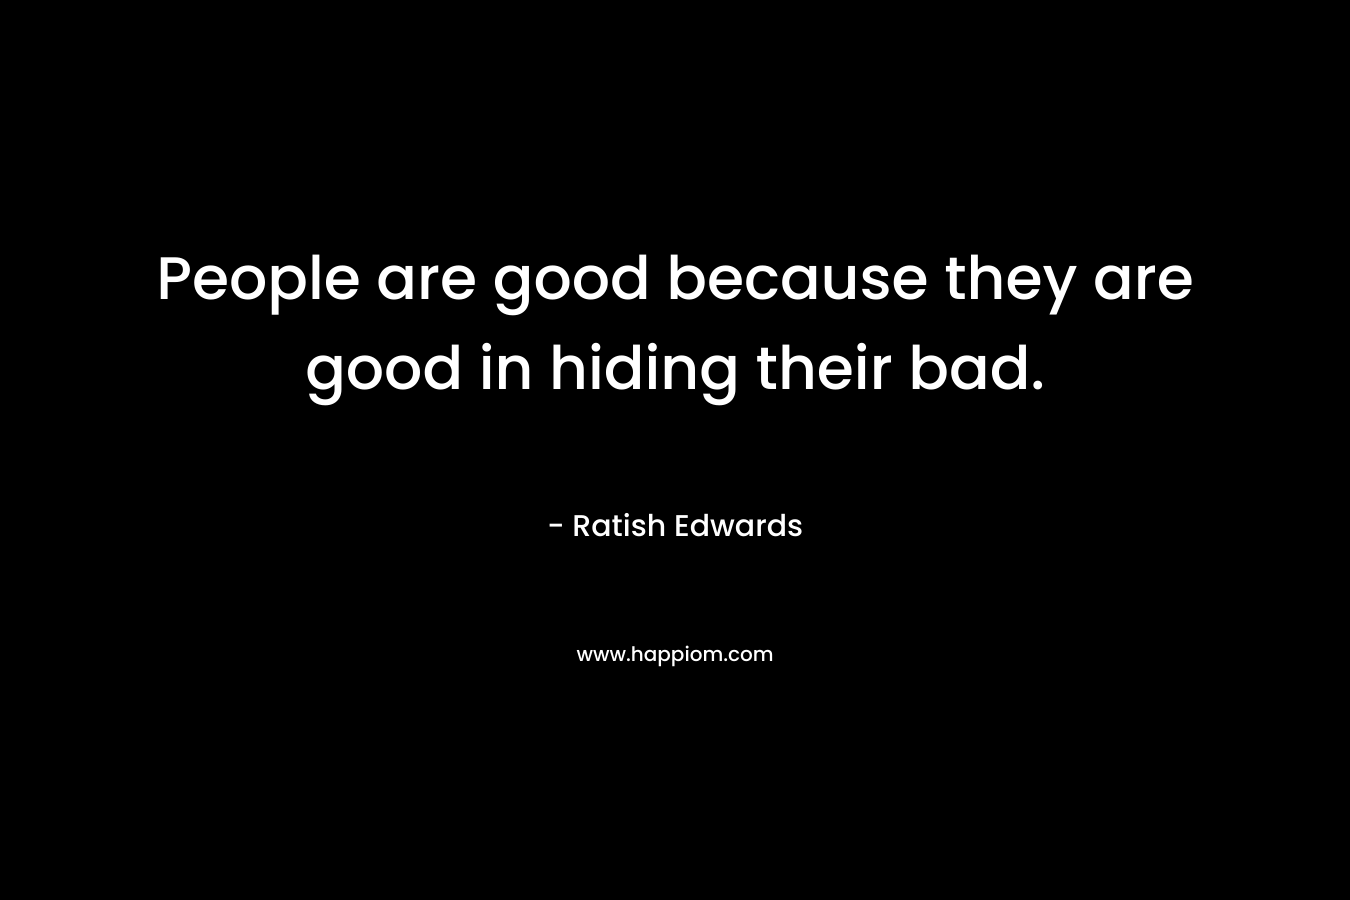 People are good because they are good in hiding their bad. – Ratish Edwards